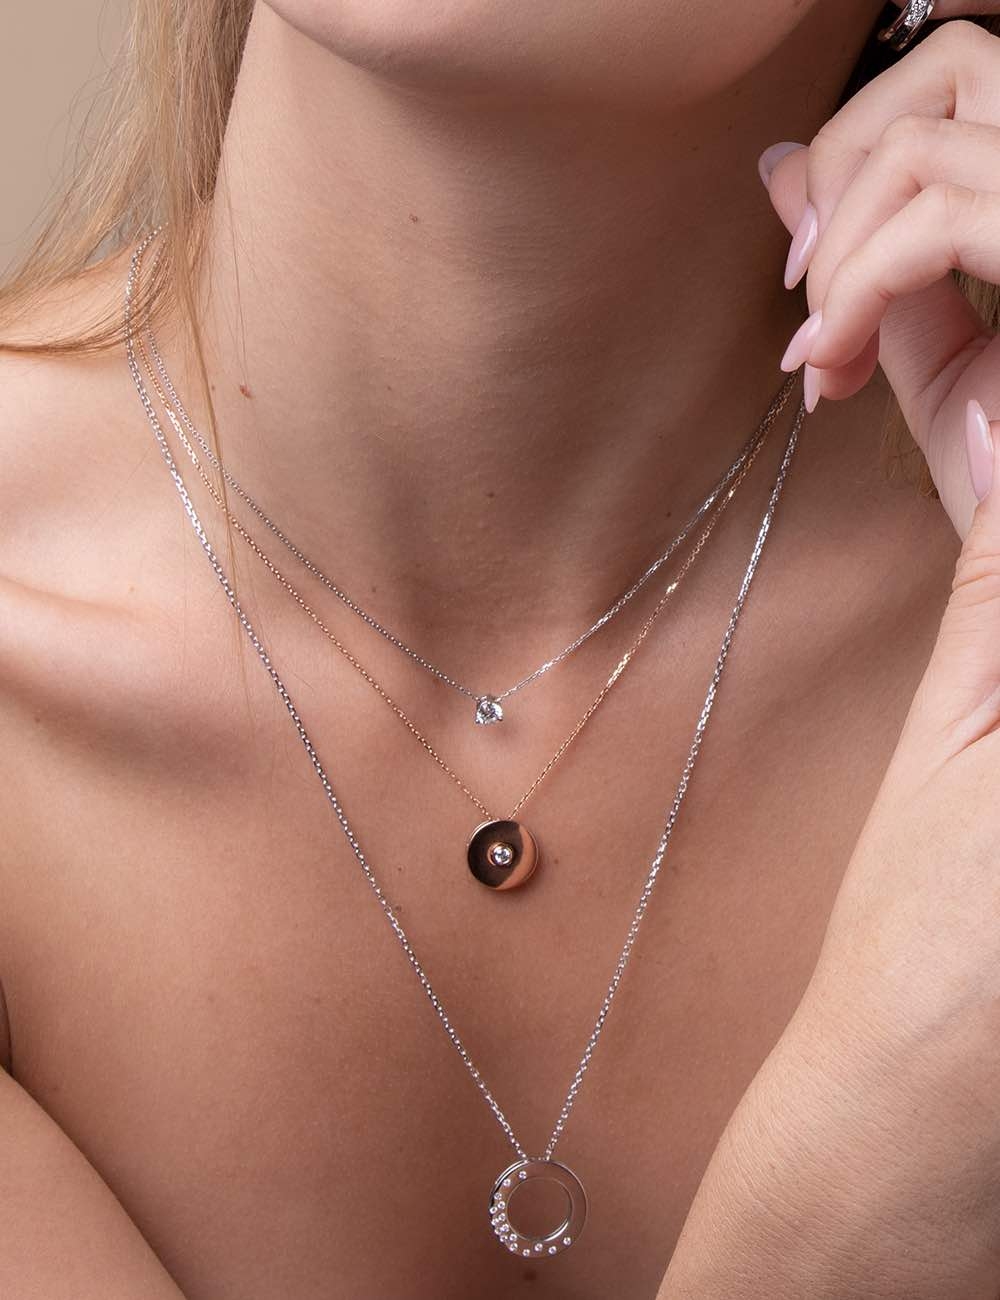 Women's necklace in white gold and white diamonds to wear everyday.